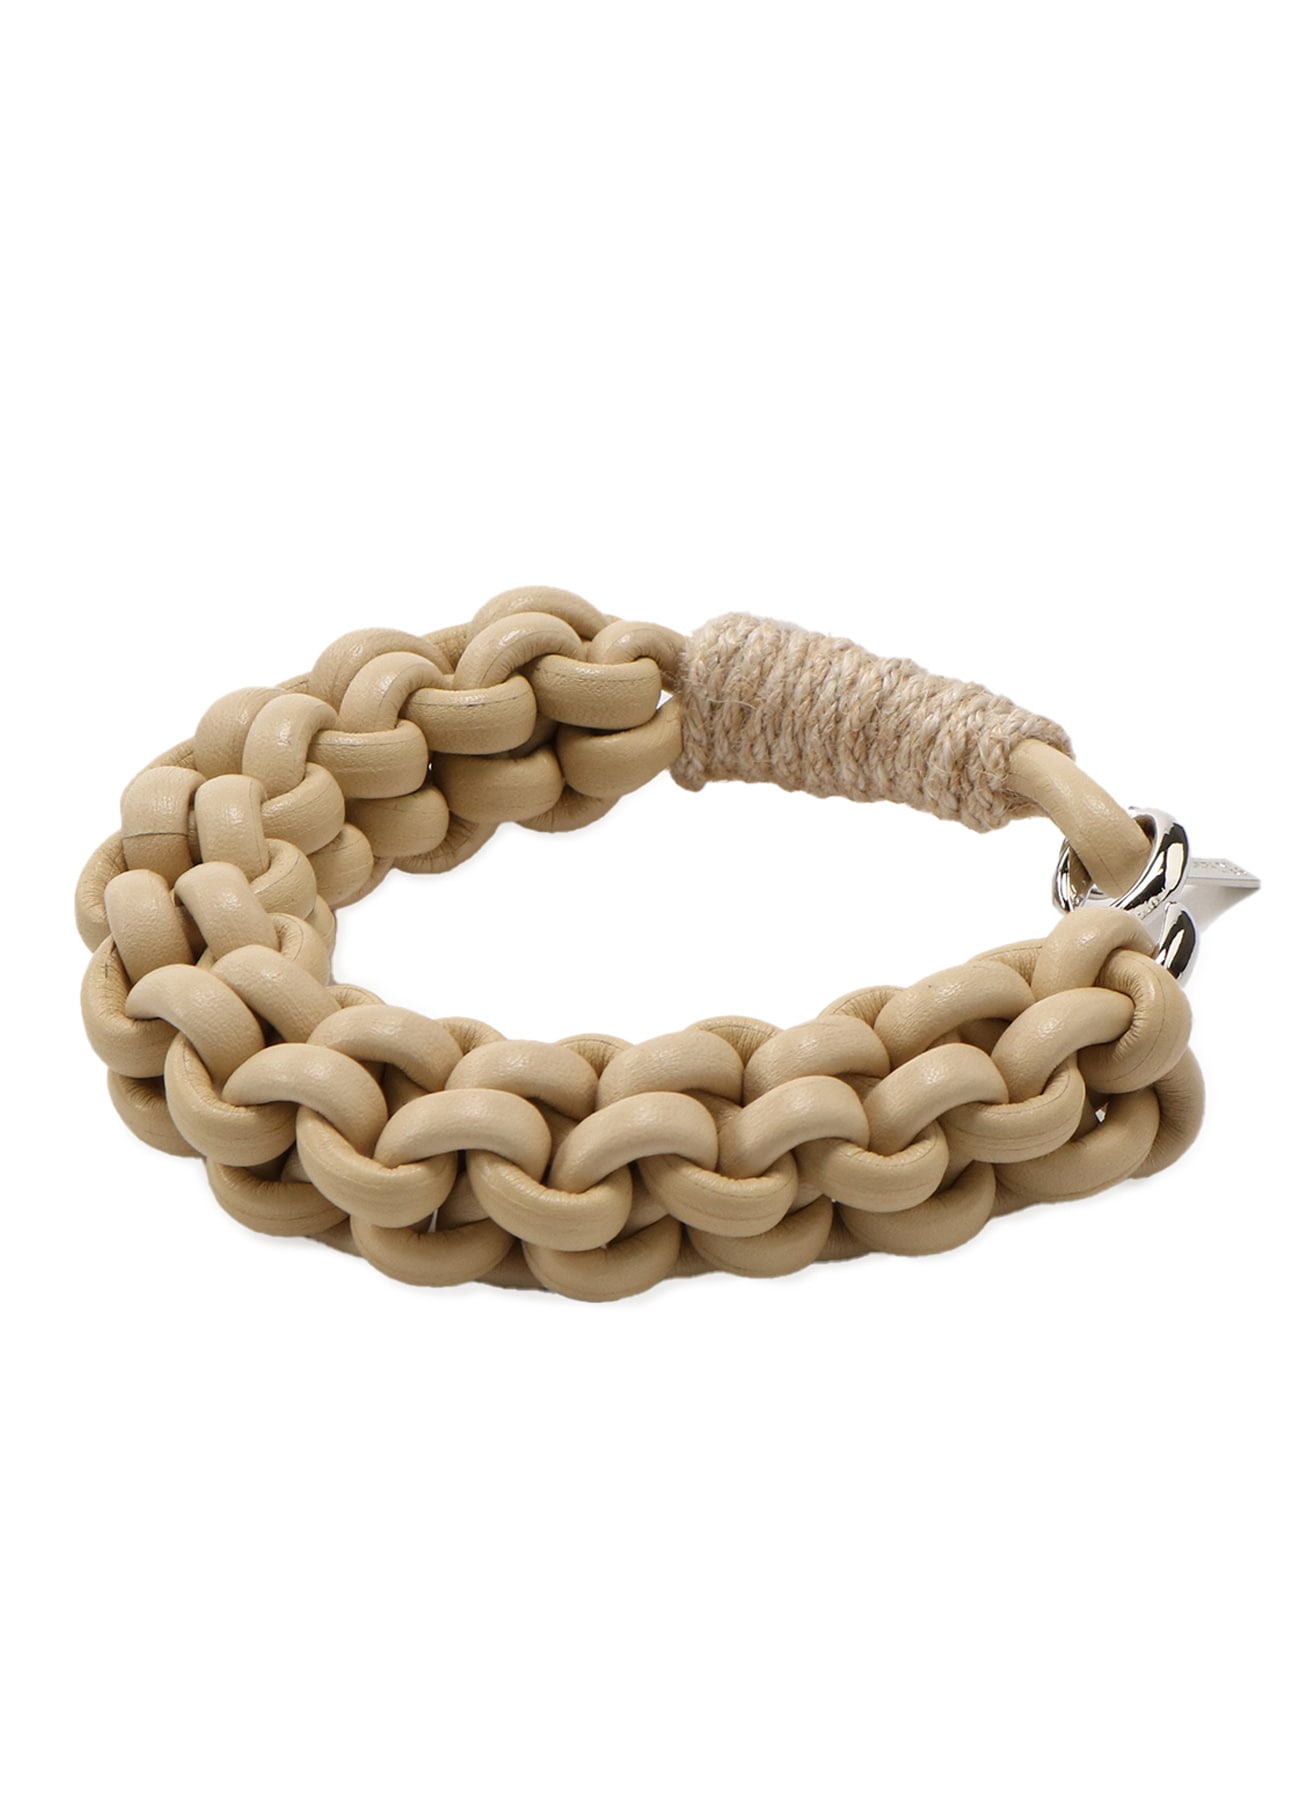 LEATHER CODE LEATHER CORD BRACELET